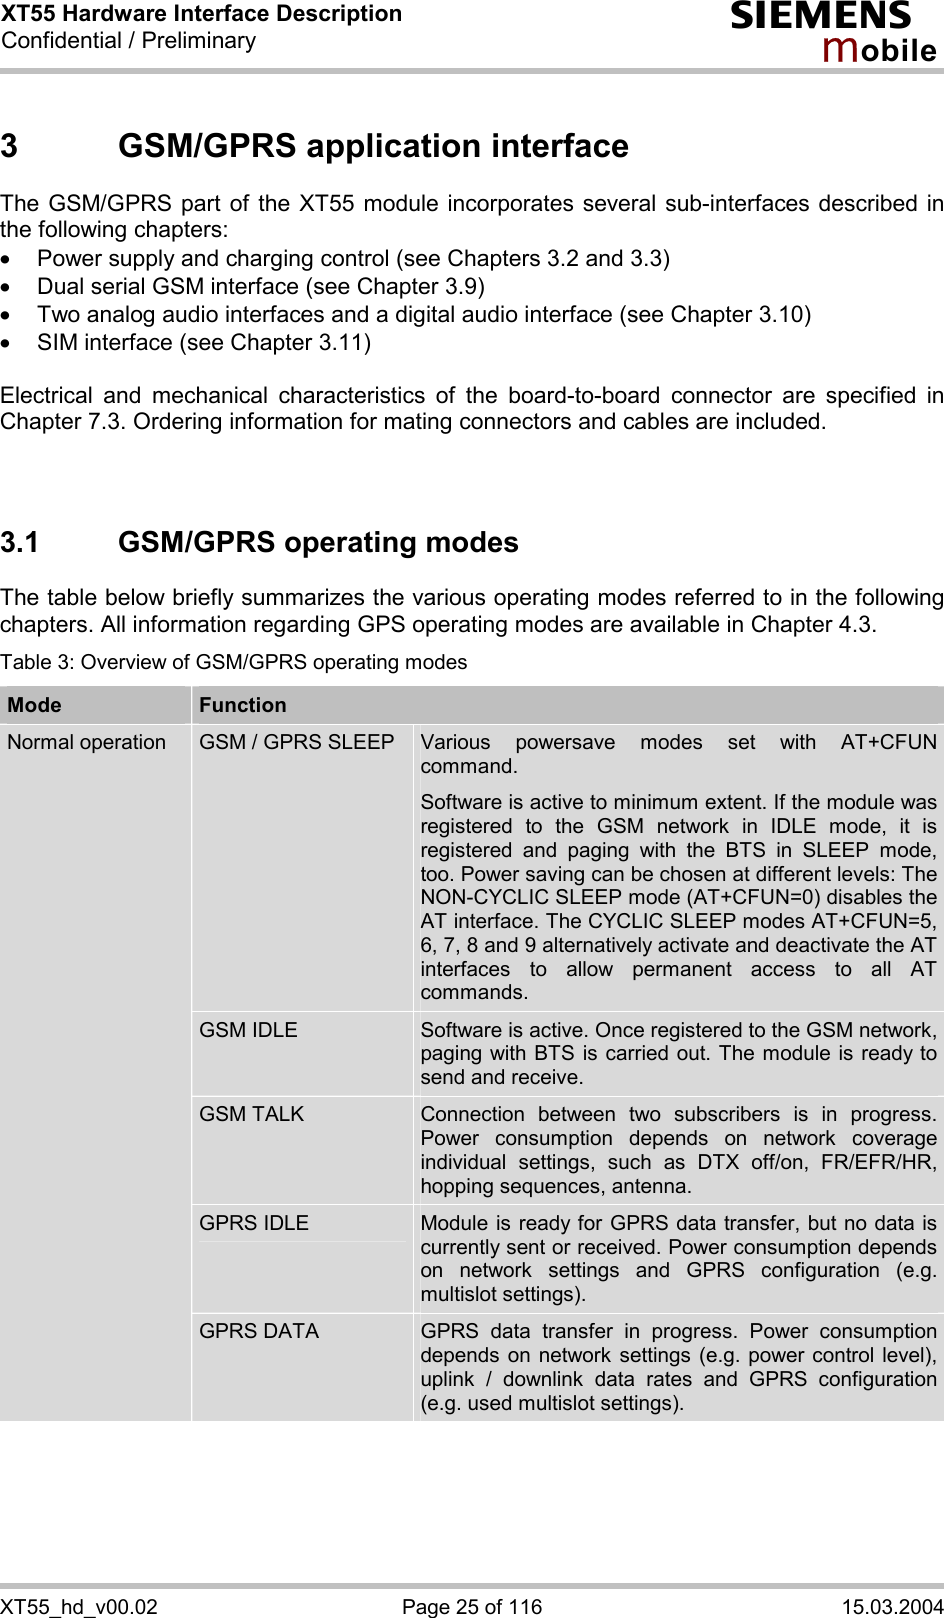 XT55 Hardware Interface Description Confidential / Preliminary s mo b i l e XT55_hd_v00.02  Page 25 of 116  15.03.2004 3  GSM/GPRS application interface The GSM/GPRS part of the XT55 module incorporates several sub-interfaces described in the following chapters: ·  Power supply and charging control (see Chapters 3.2 and 3.3) ·  Dual serial GSM interface (see Chapter 3.9) ·  Two analog audio interfaces and a digital audio interface (see Chapter 3.10) ·  SIM interface (see Chapter 3.11)  Electrical and mechanical characteristics of the board-to-board connector are specified in Chapter 7.3. Ordering information for mating connectors and cables are included.   3.1  GSM/GPRS operating modes The table below briefly summarizes the various operating modes referred to in the following chapters. All information regarding GPS operating modes are available in Chapter 4.3. Table 3: Overview of GSM/GPRS operating modes Mode  Function GSM / GPRS SLEEP  Various powersave modes set with AT+CFUN command.  Software is active to minimum extent. If the module was registered to the GSM network in IDLE mode, it is registered and paging with the BTS in SLEEP mode, too. Power saving can be chosen at different levels: The NON-CYCLIC SLEEP mode (AT+CFUN=0) disables the AT interface. The CYCLIC SLEEP modes AT+CFUN=5, 6, 7, 8 and 9 alternatively activate and deactivate the AT interfaces to allow permanent access to all AT commands. GSM IDLE  Software is active. Once registered to the GSM network, paging with BTS is carried out. The module is ready to send and receive. GSM TALK  Connection between two subscribers is in progress. Power consumption depends on network coverage individual settings, such as DTX off/on, FR/EFR/HR, hopping sequences, antenna. GPRS IDLE  Module is ready for GPRS data transfer, but no data is currently sent or received. Power consumption depends on network settings and GPRS configuration (e.g. multislot settings). Normal operation GPRS DATA  GPRS data transfer in progress. Power consumption depends on network settings (e.g. power control level), uplink / downlink data rates and GPRS configuration (e.g. used multislot settings). 